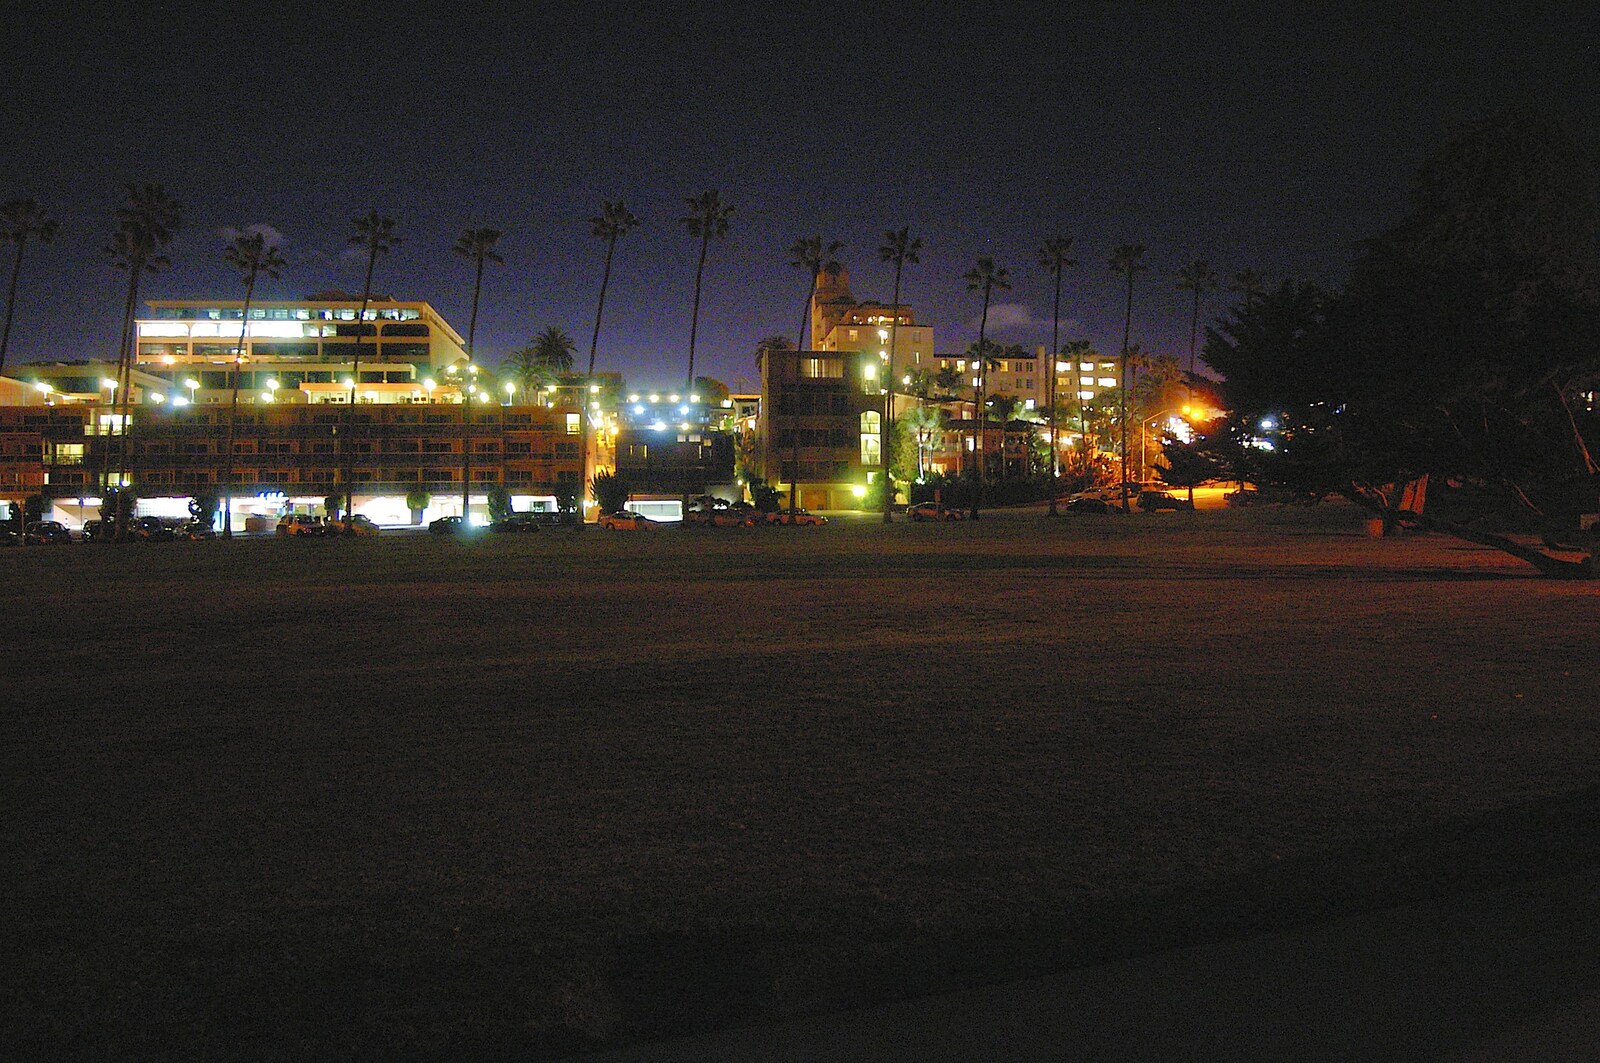 The beach at night from San Diego Misc: Beaches, Car Parks and Airports, San Diego, California, US - 4th March 2006